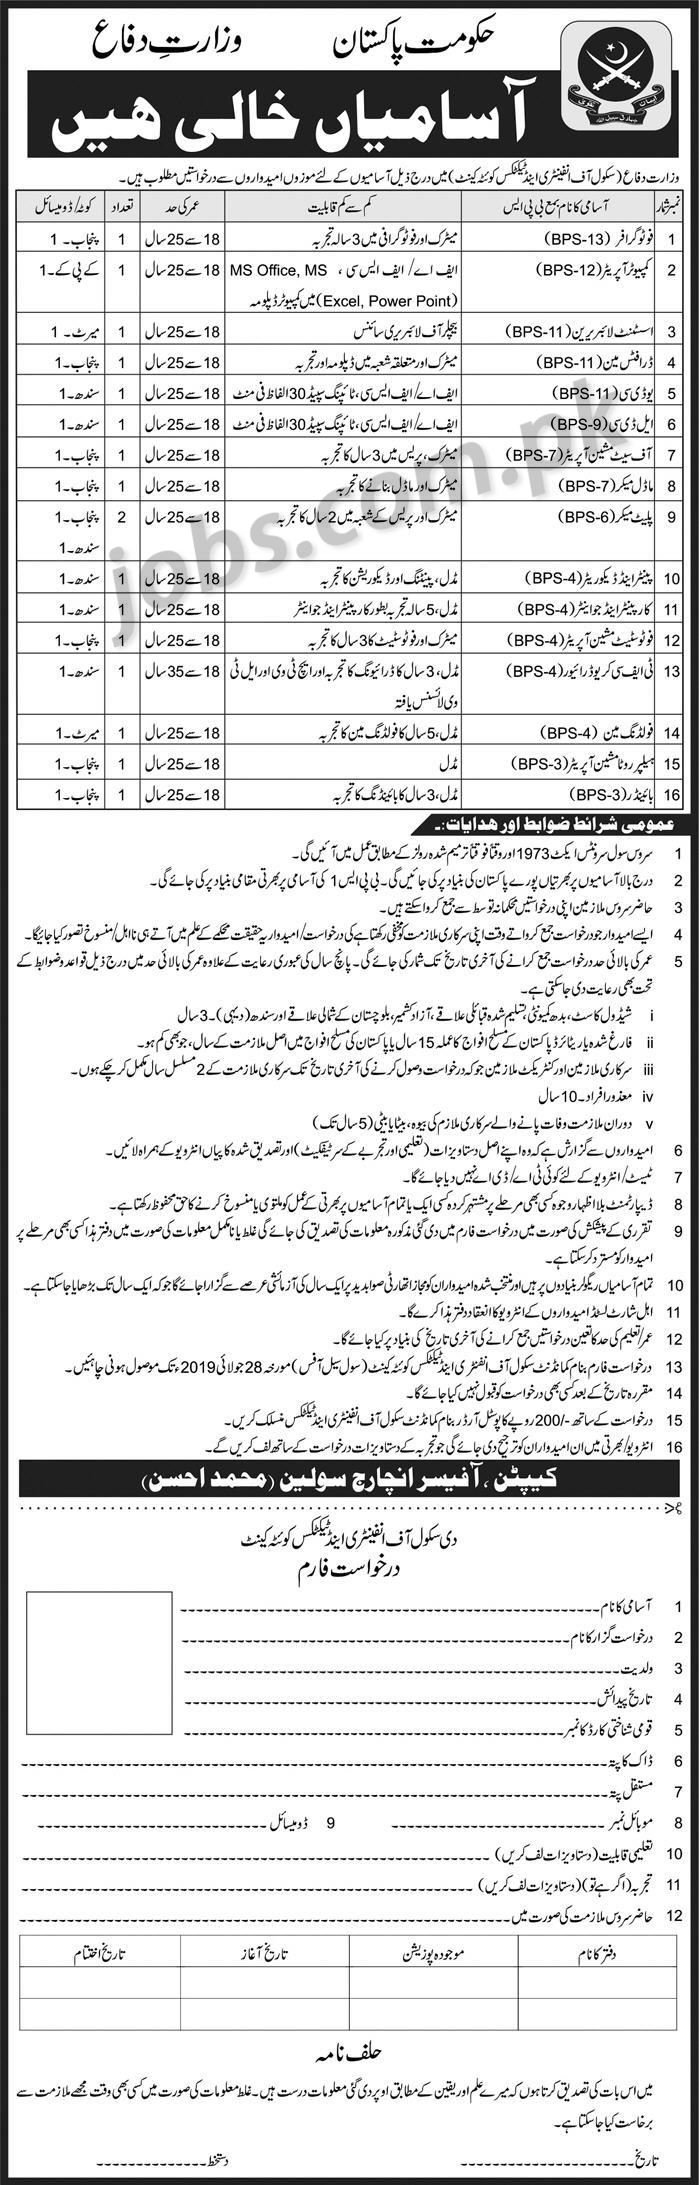 Ministry Of Defence Jobs 2019 For 17+ LDC/UDC Clerks, Computer Operator, Photographer & Other